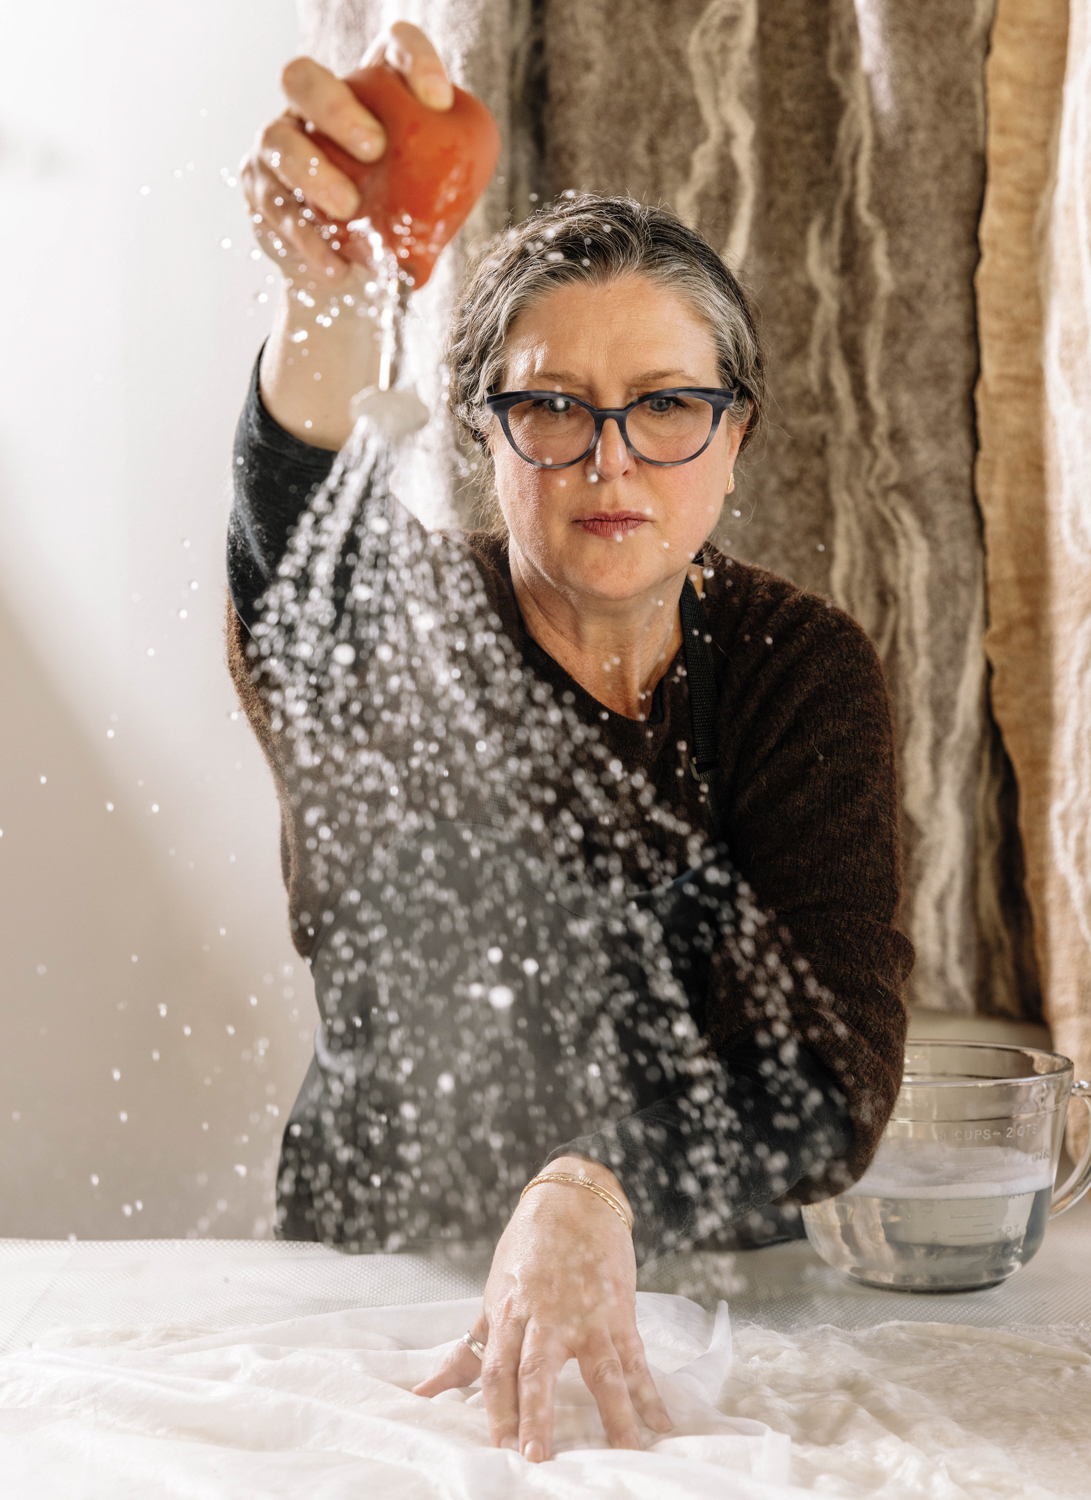 Kristin Kelly Colombano uses hot water to manipulate the fibers